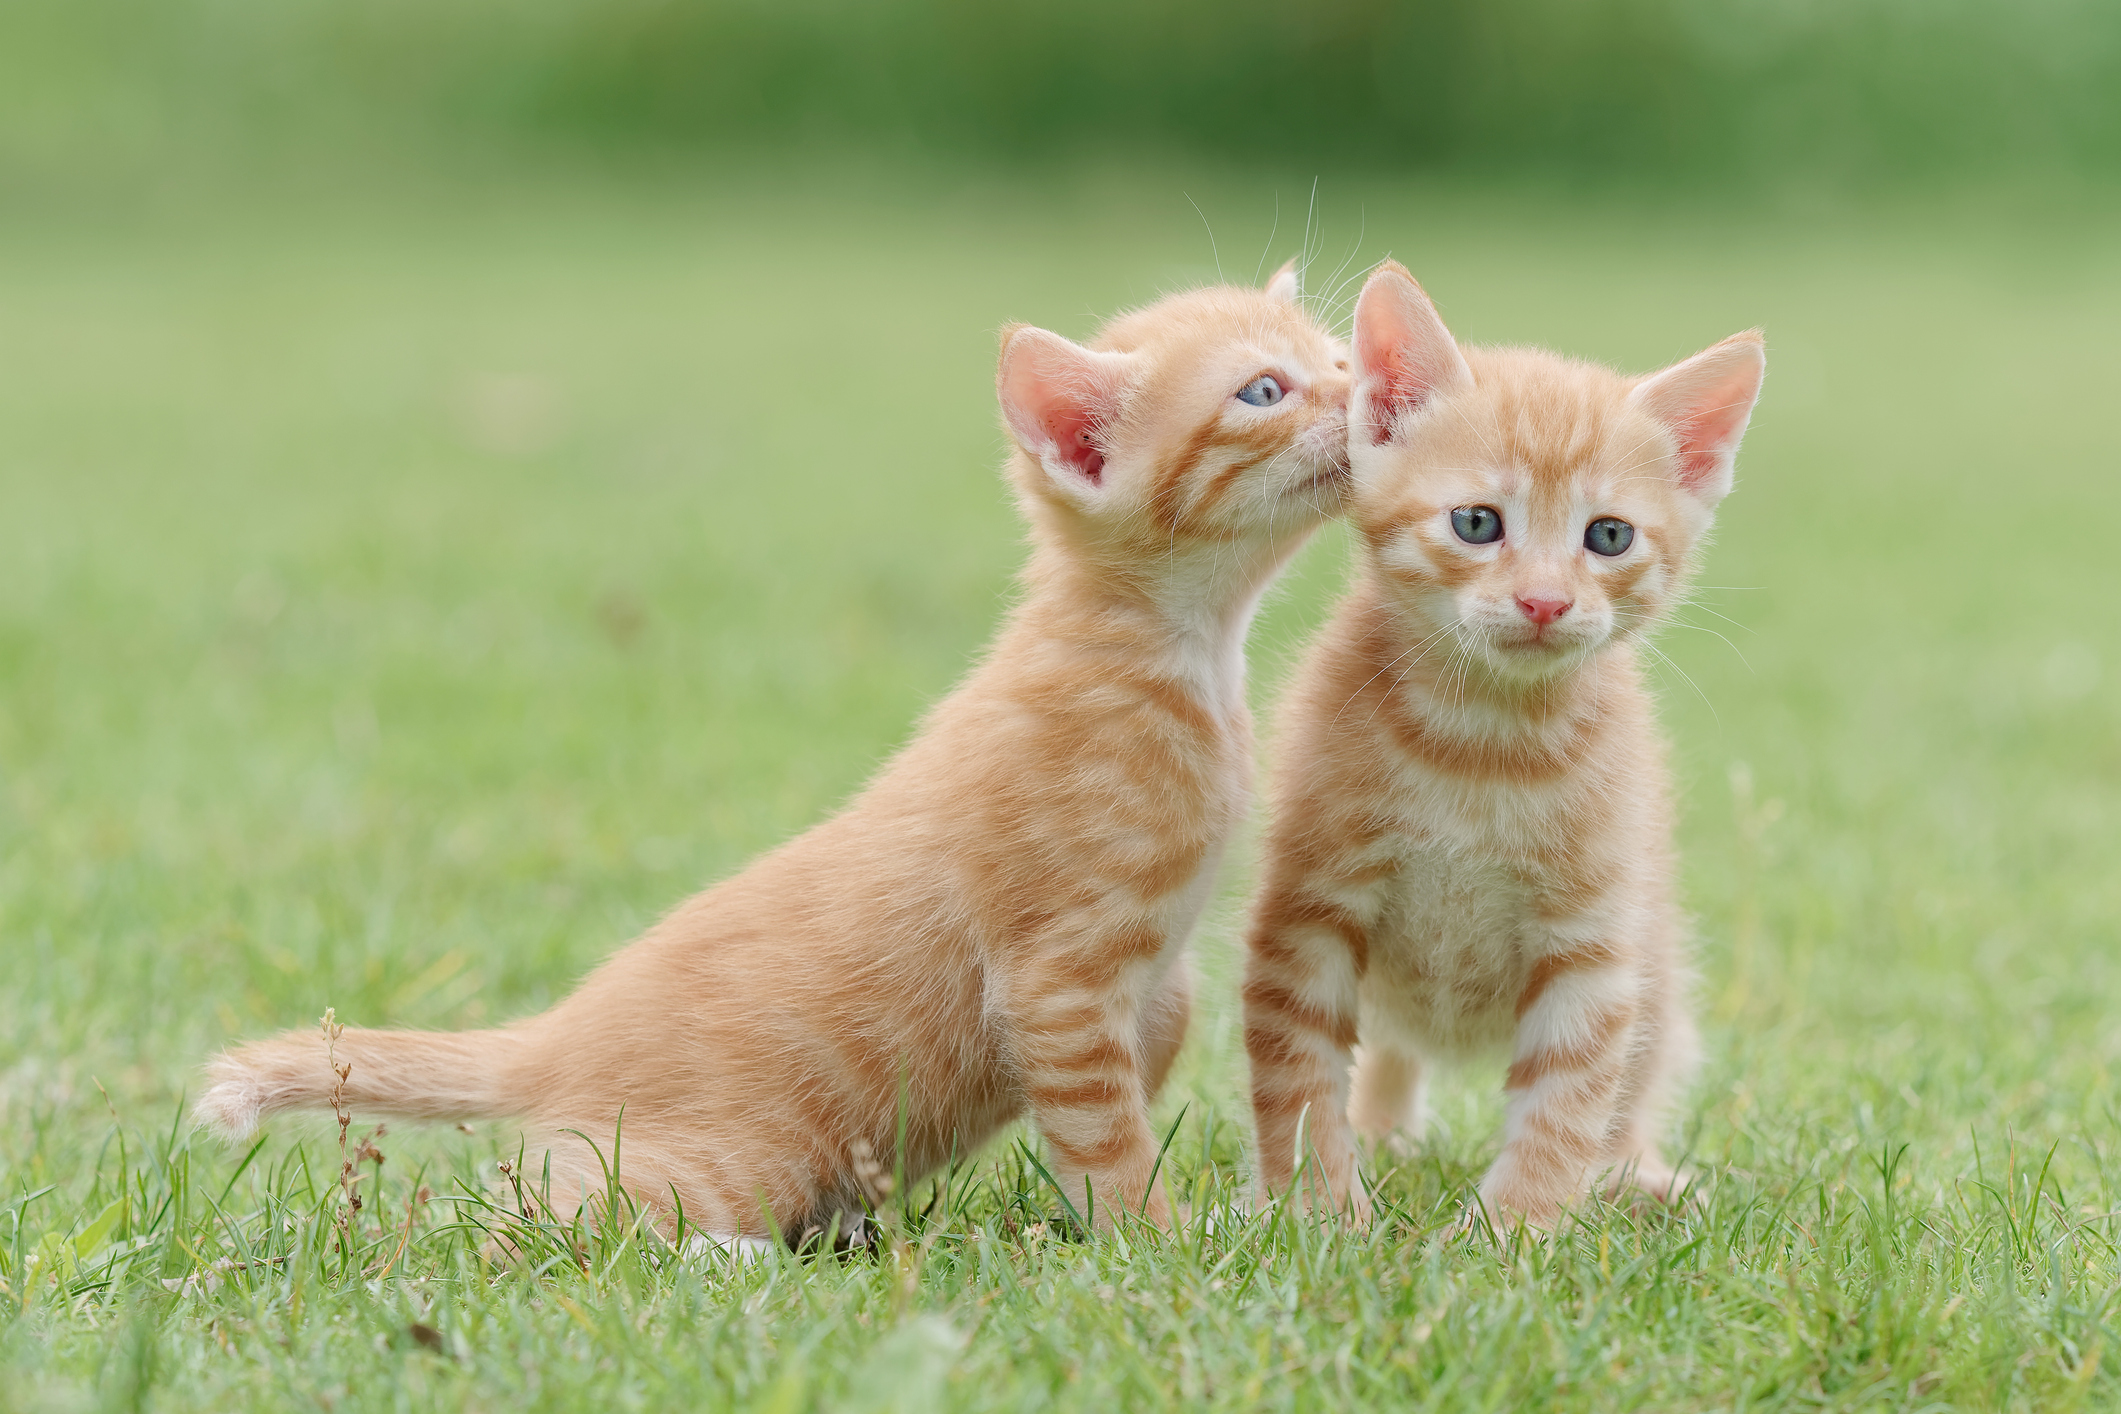 Two kittens sitting on grass outside